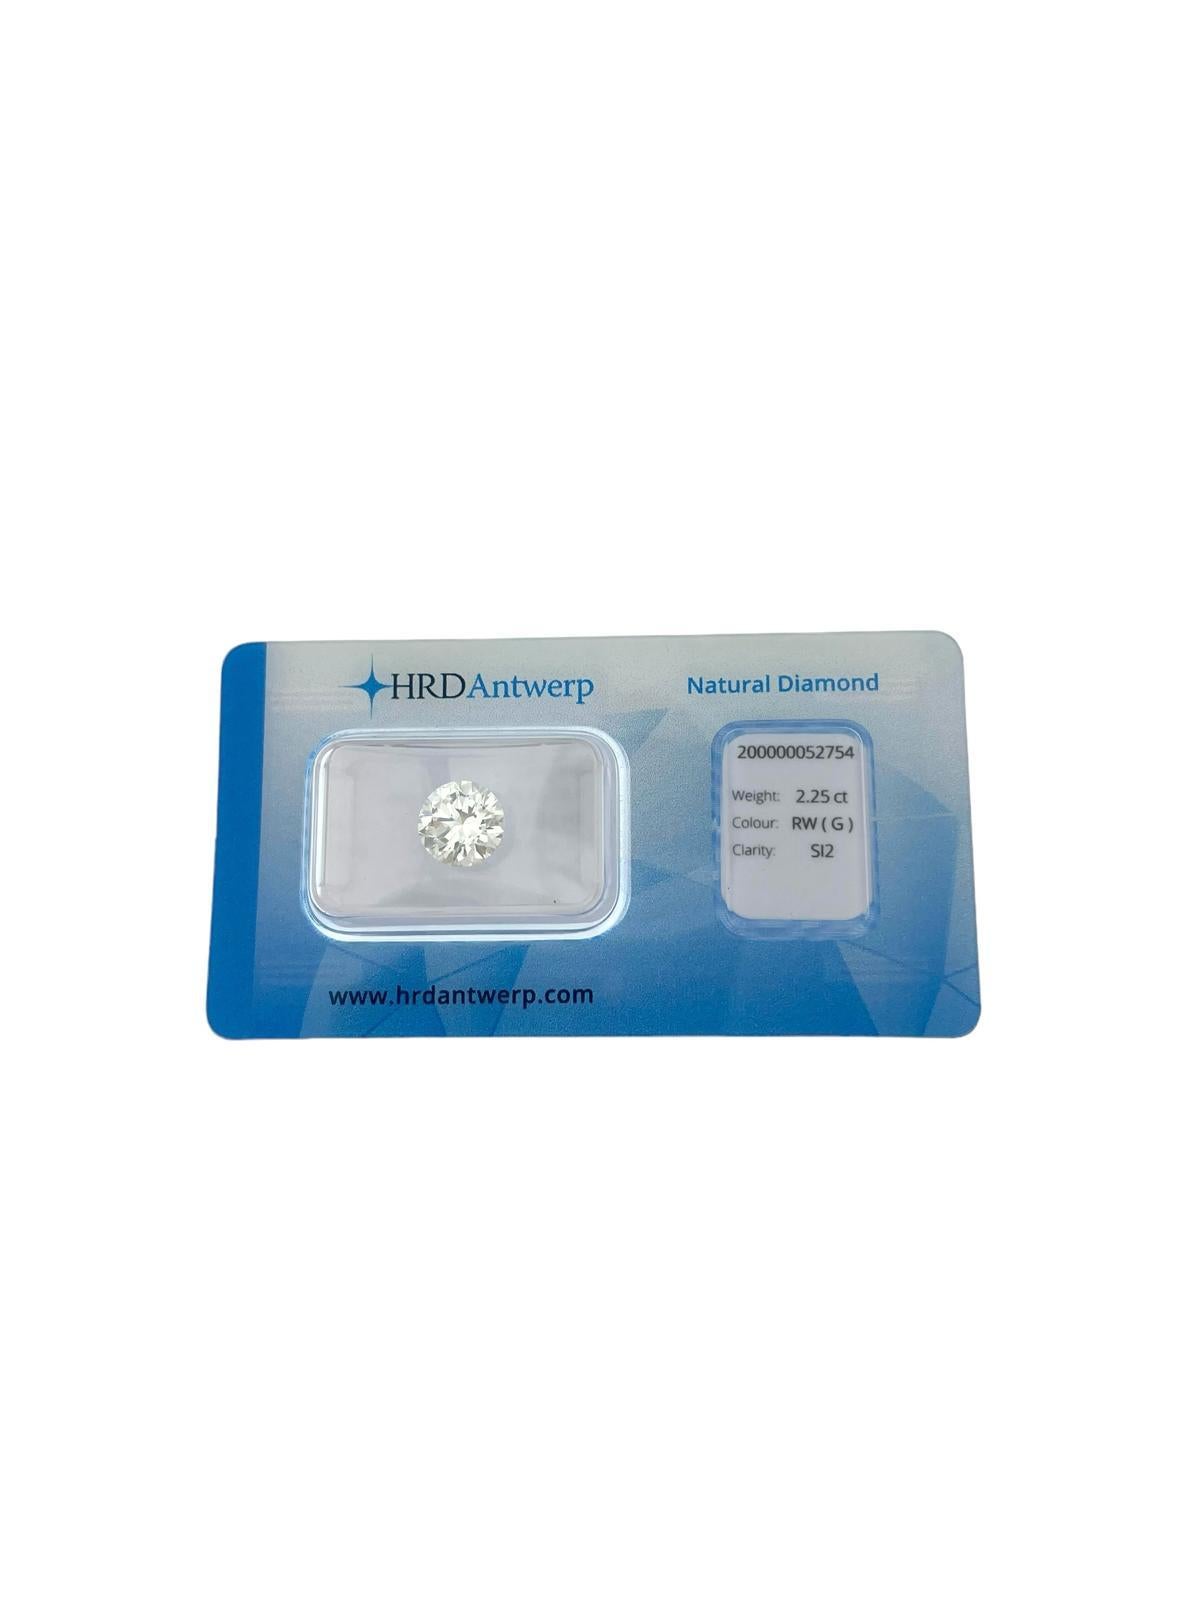 The HRD Certified 2.25ct Brilliant-Cut Diamond is a stunning gemstone of exceptional quality and brilliance. Certified by the prestigious HRD (Hoge Raad voor Diamant) institute, this diamond is guaranteed to meet the highest standards of clarity,